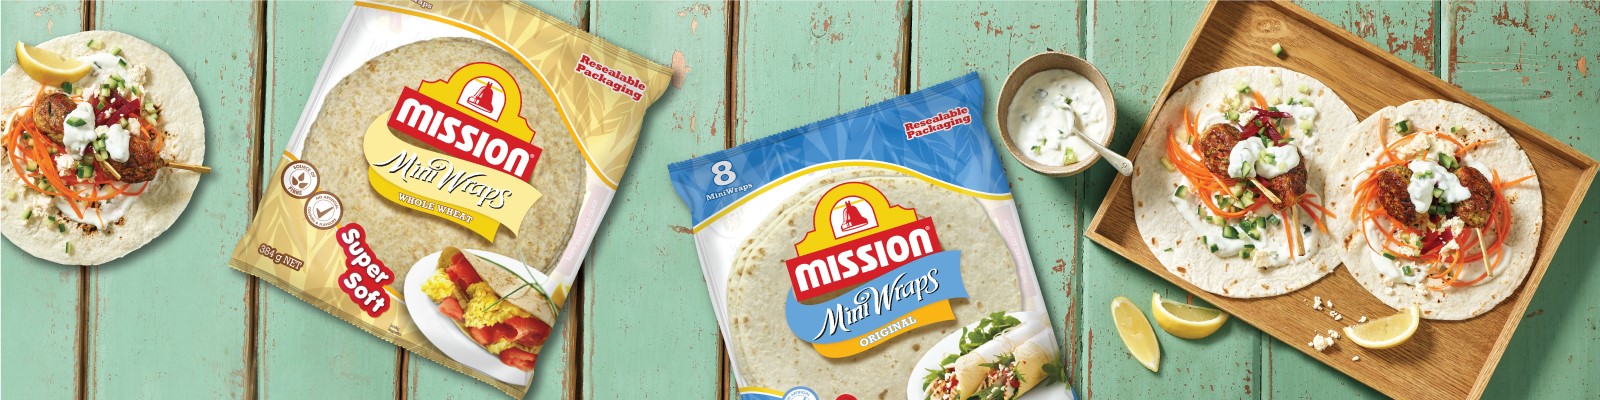 Mission Website Banner Products Page Bakery 1600X400px Mini Wraps